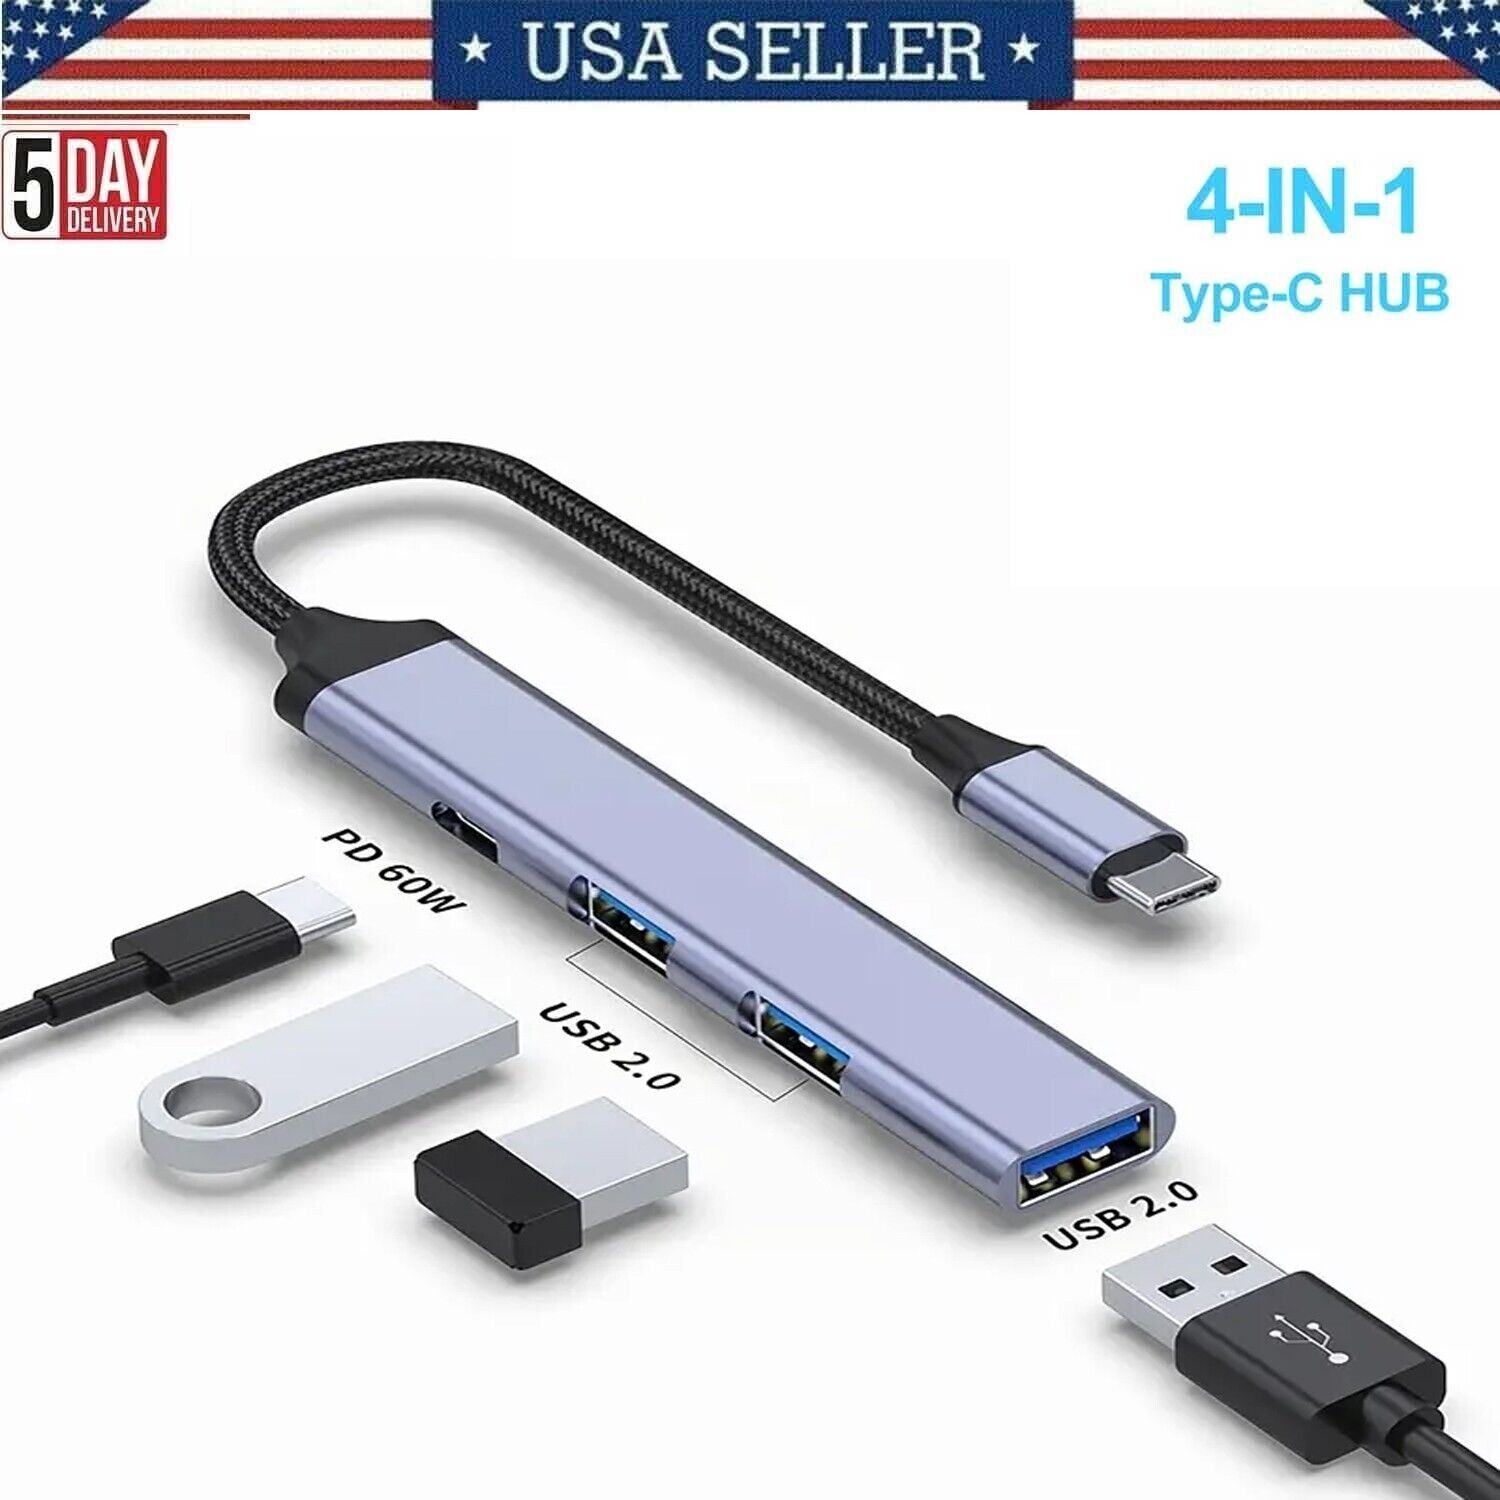 Multifunction 4 in 1 Type-C HUB To 4K HDMI USB 3.0 PD Charging Port Adapter USA